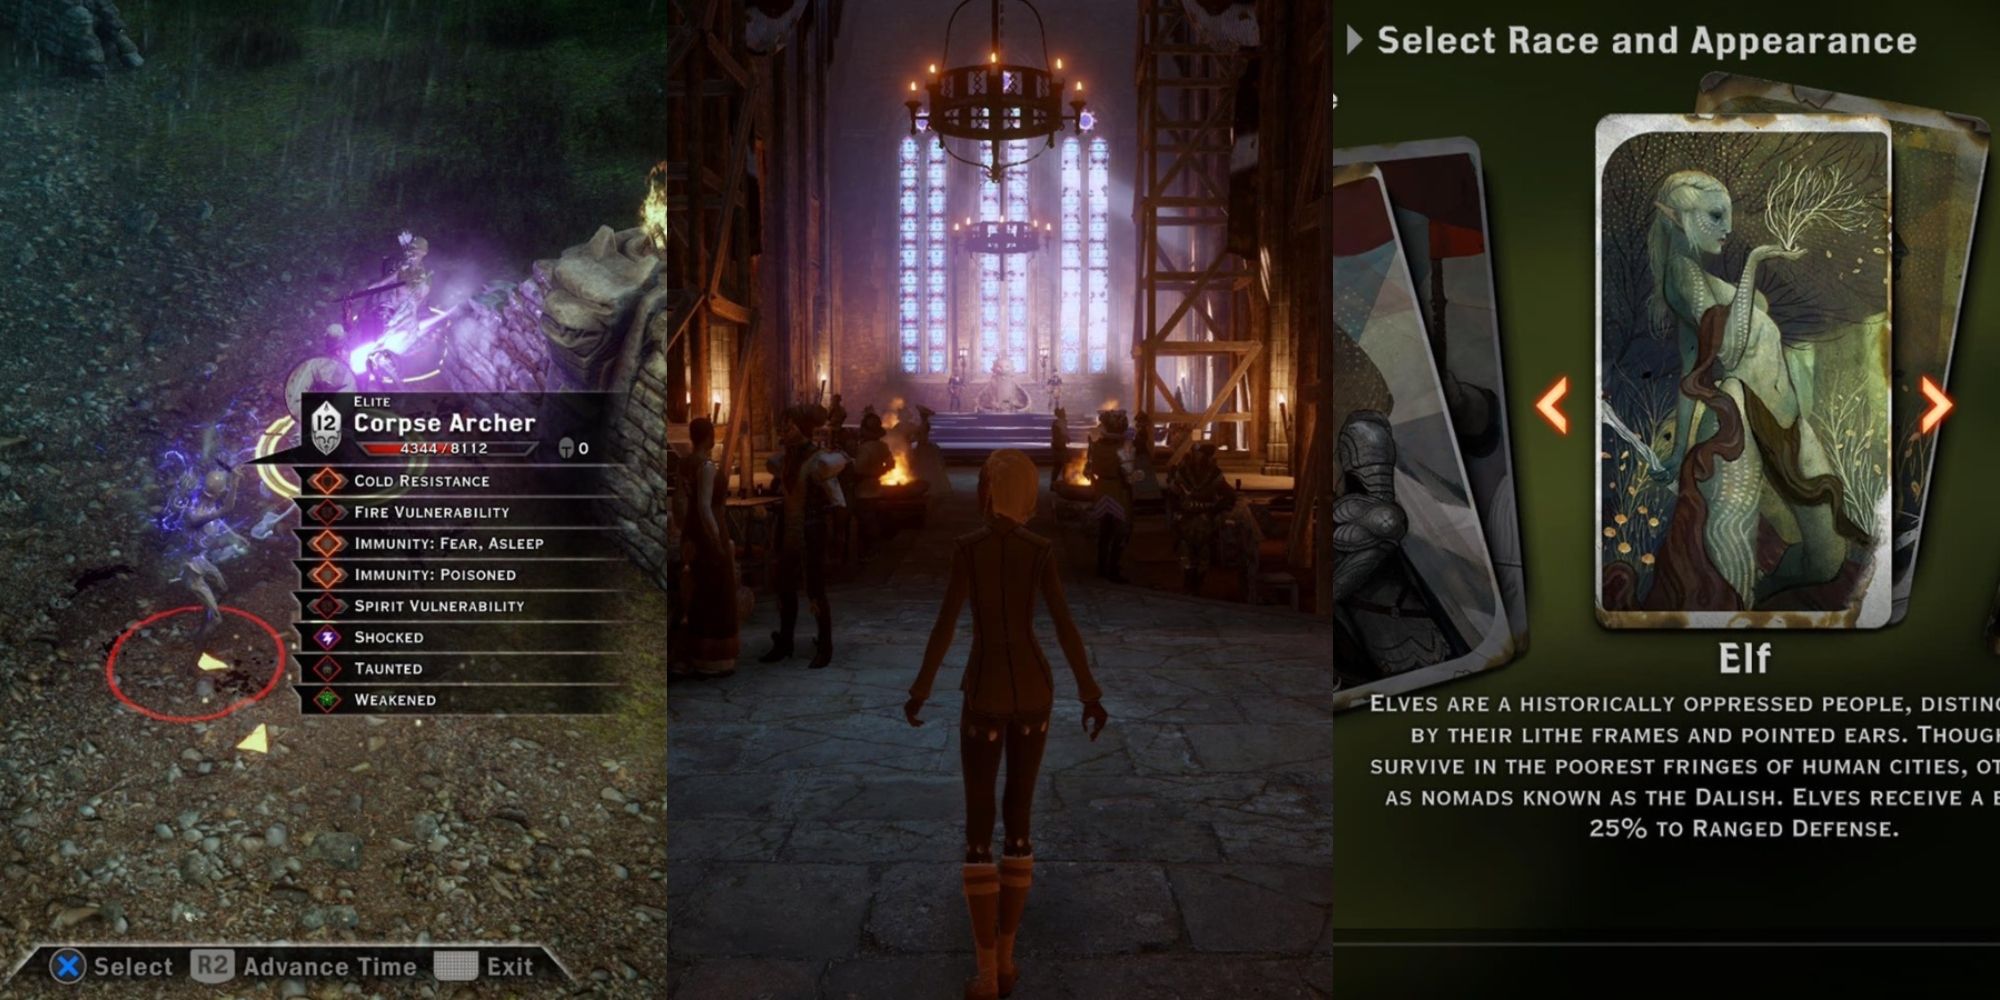 three part image, oriented vertically: on the left, an overhead view of a corpse archer enemy with a list of status effects and immunities in a small window on its right; in the middle, an elven inquisitor stands at the entrance to an under-construction throne room; on the right, a tarot card-style portrait of a green skinned elf holding a small sapling in her hand